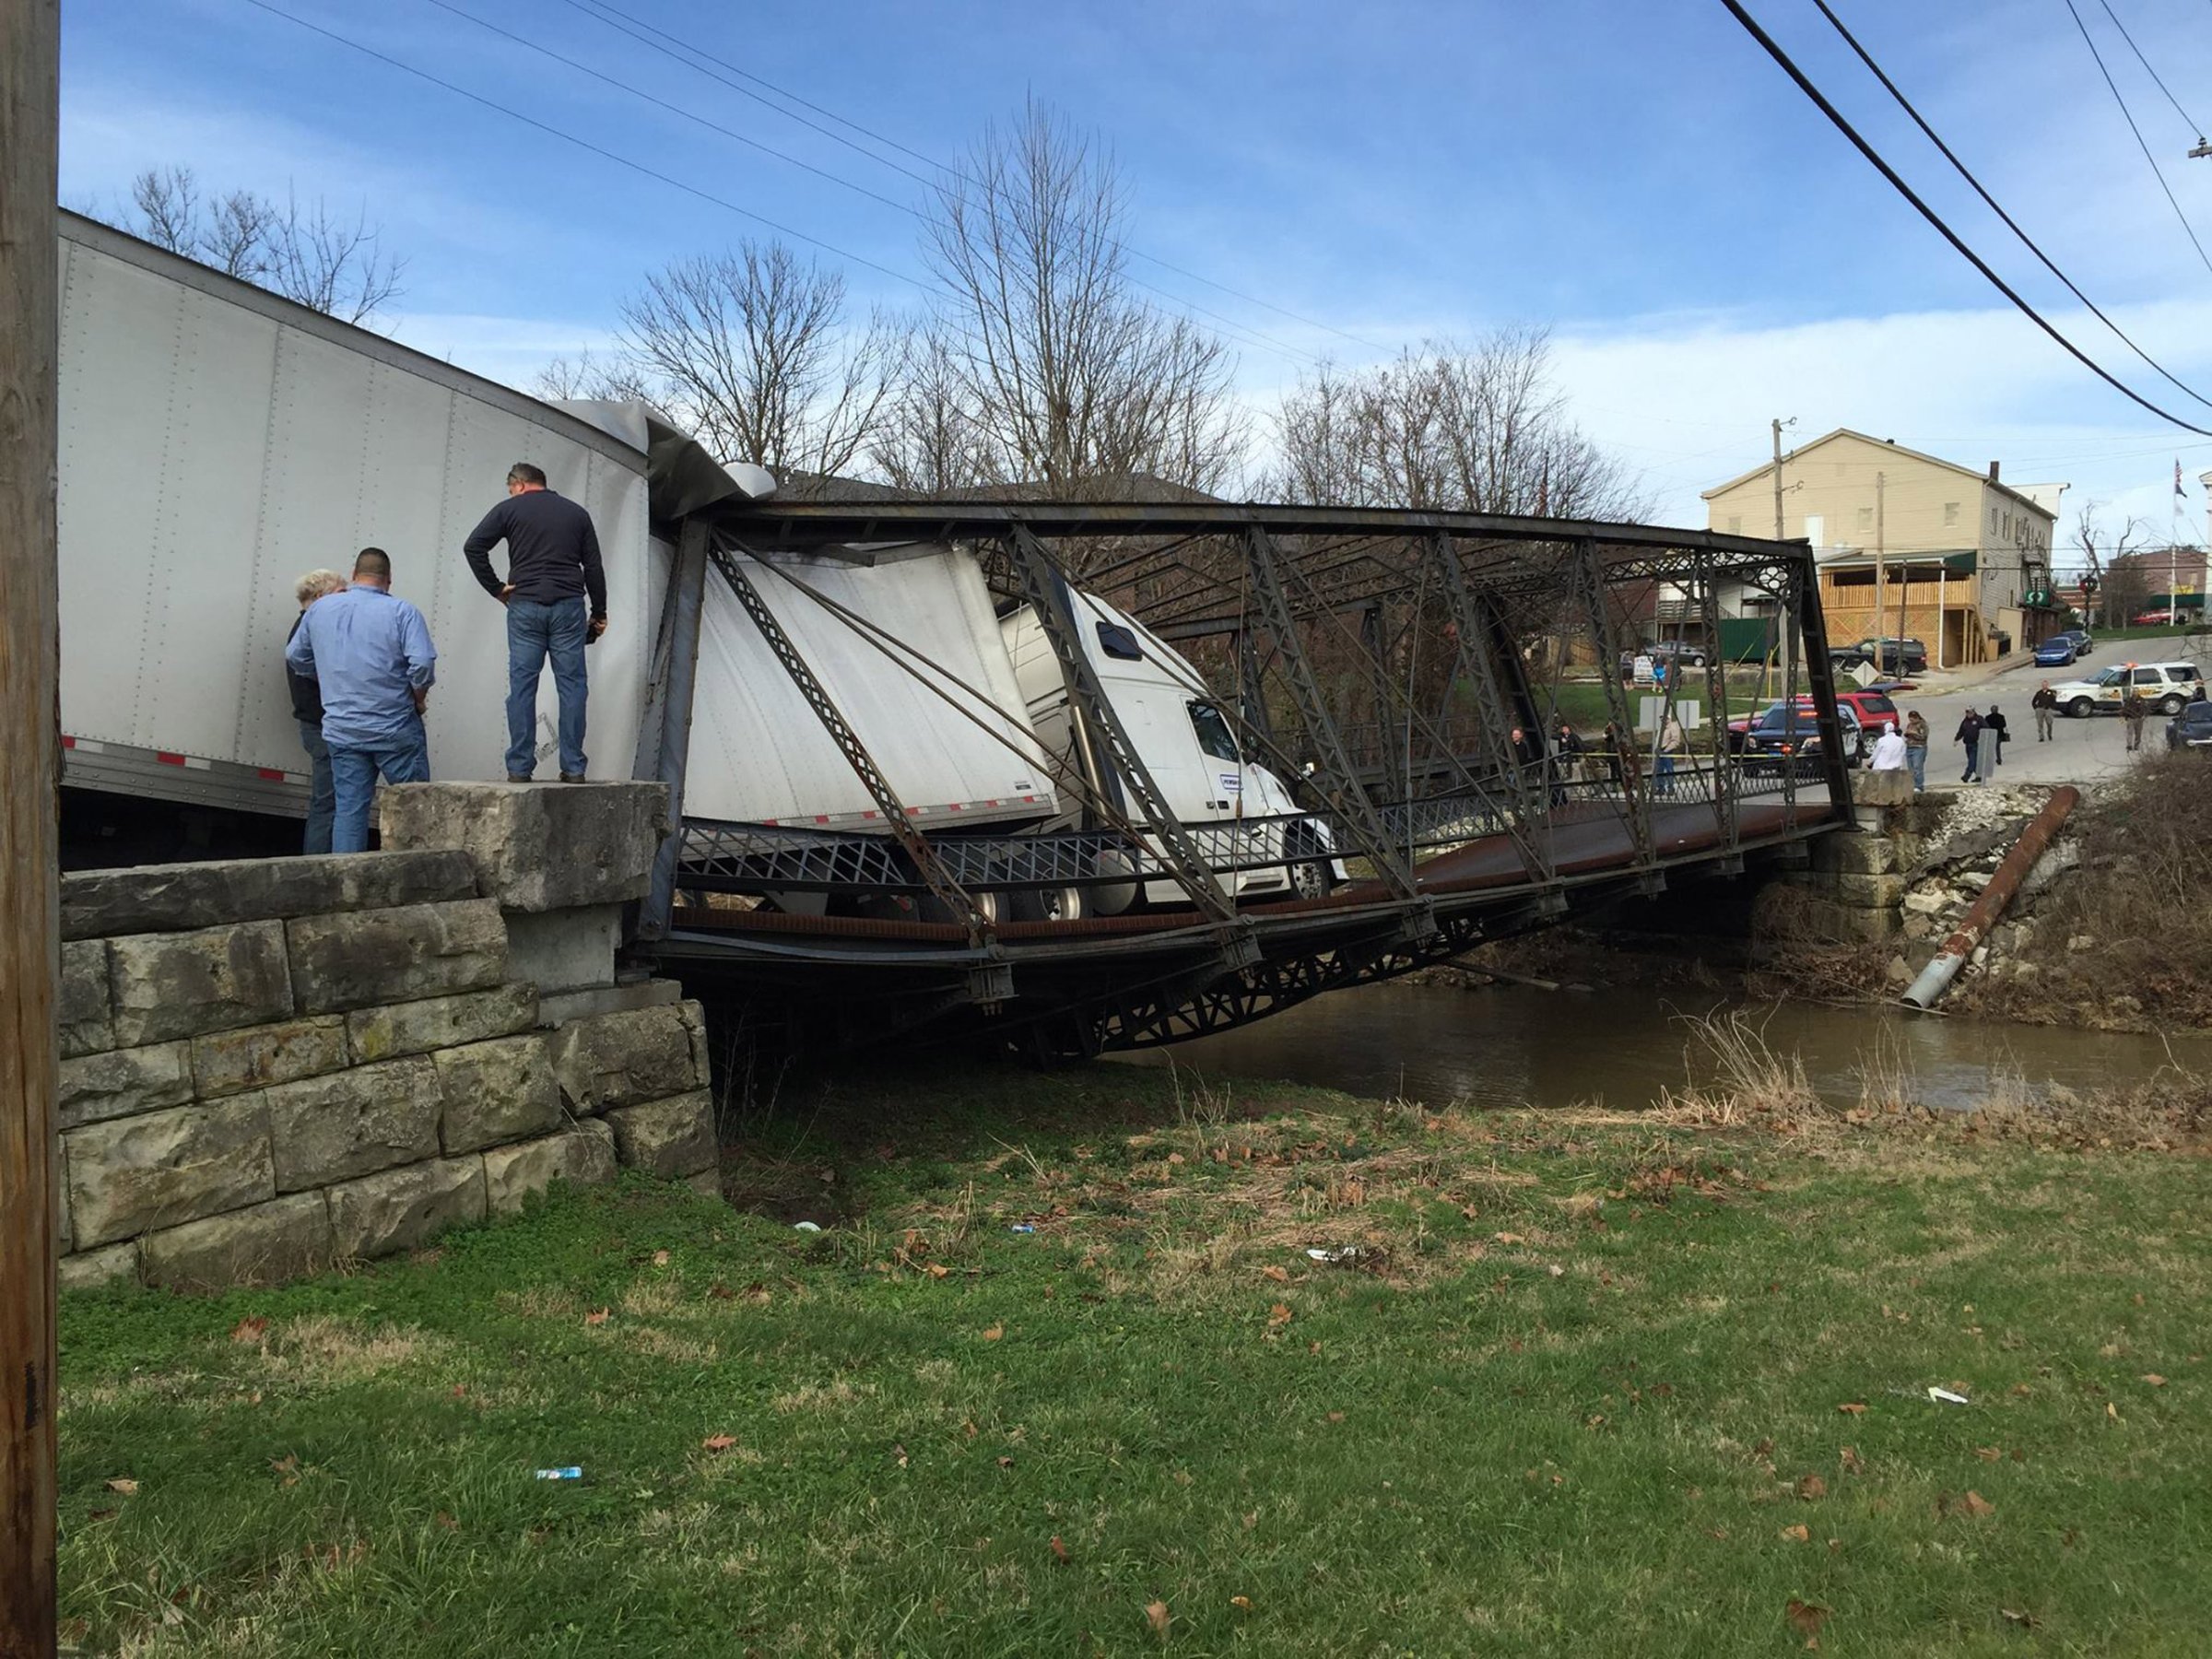 A bridge collapsed under a semitrailer weighing close to 30 tons that tried to cross it in Paoli, Ind., on Christmas.